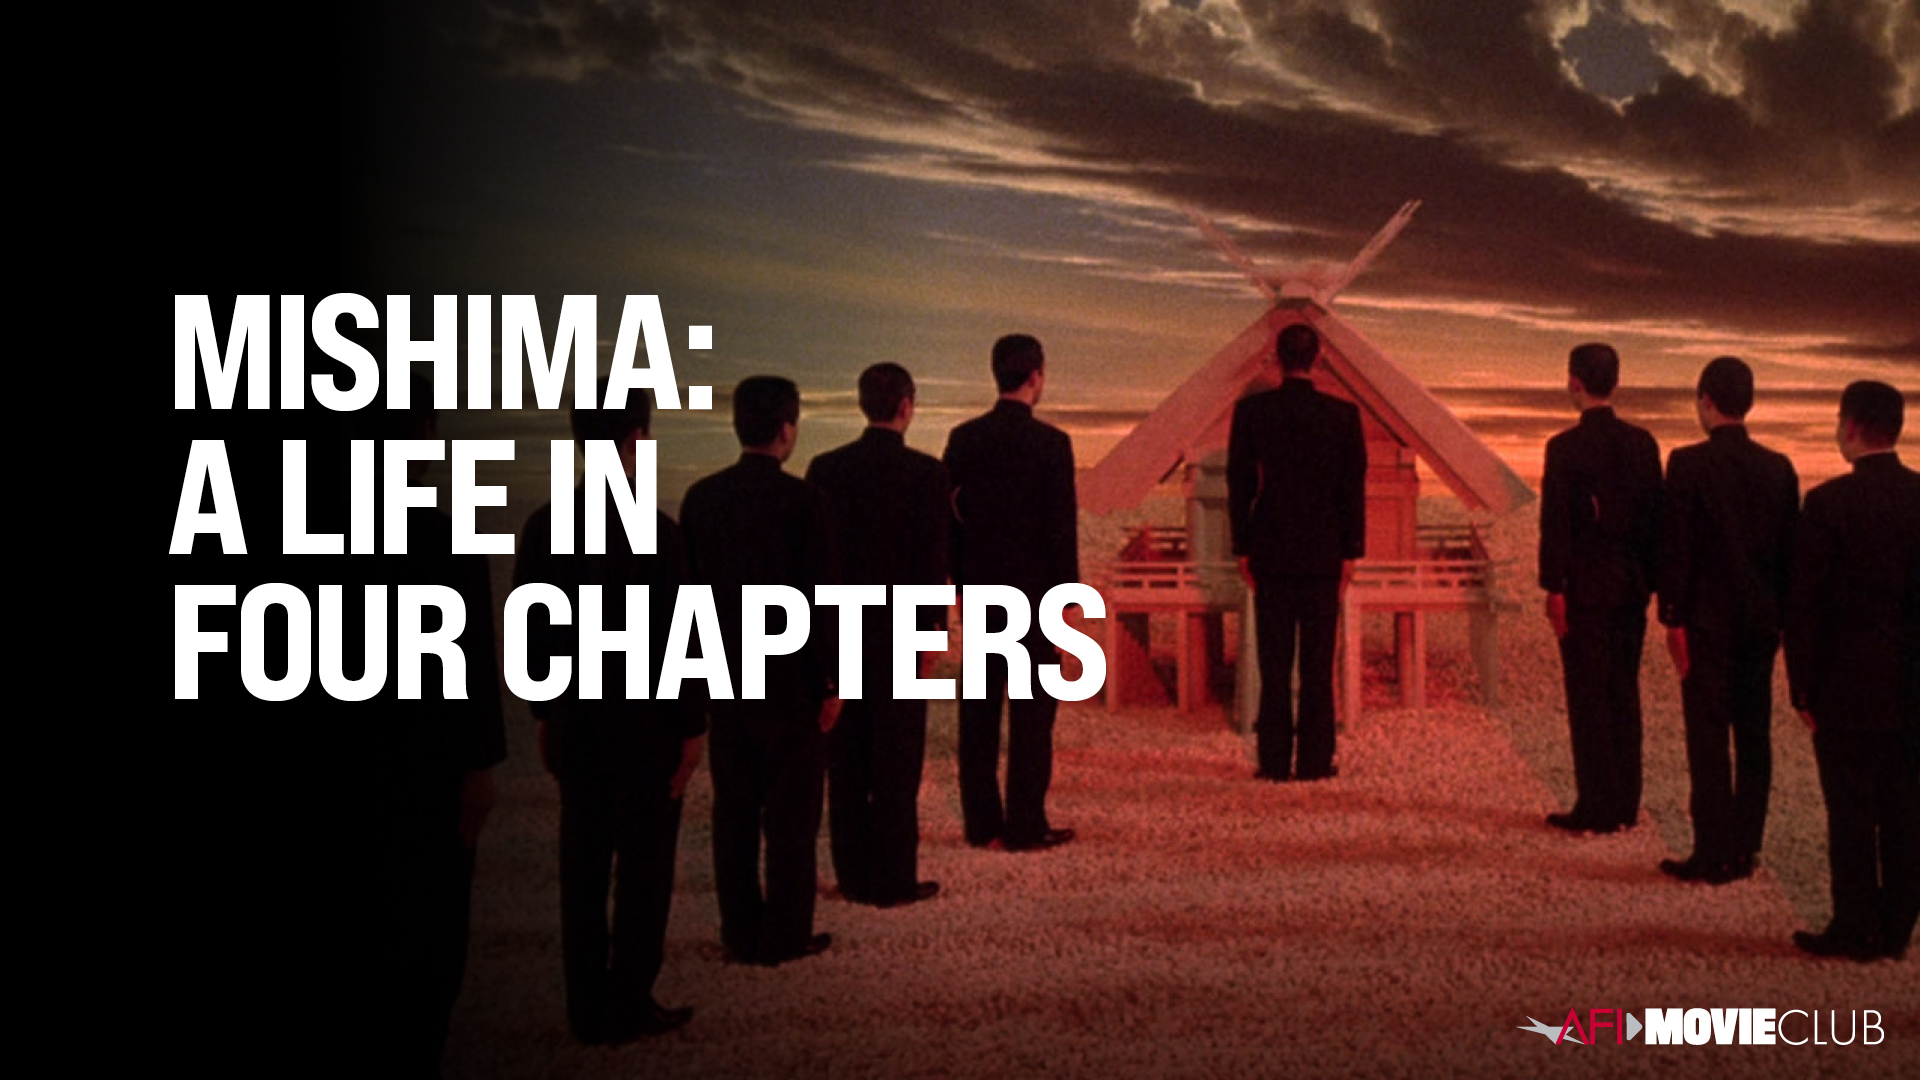 Mishima: A Life in Four Chapters Film Still